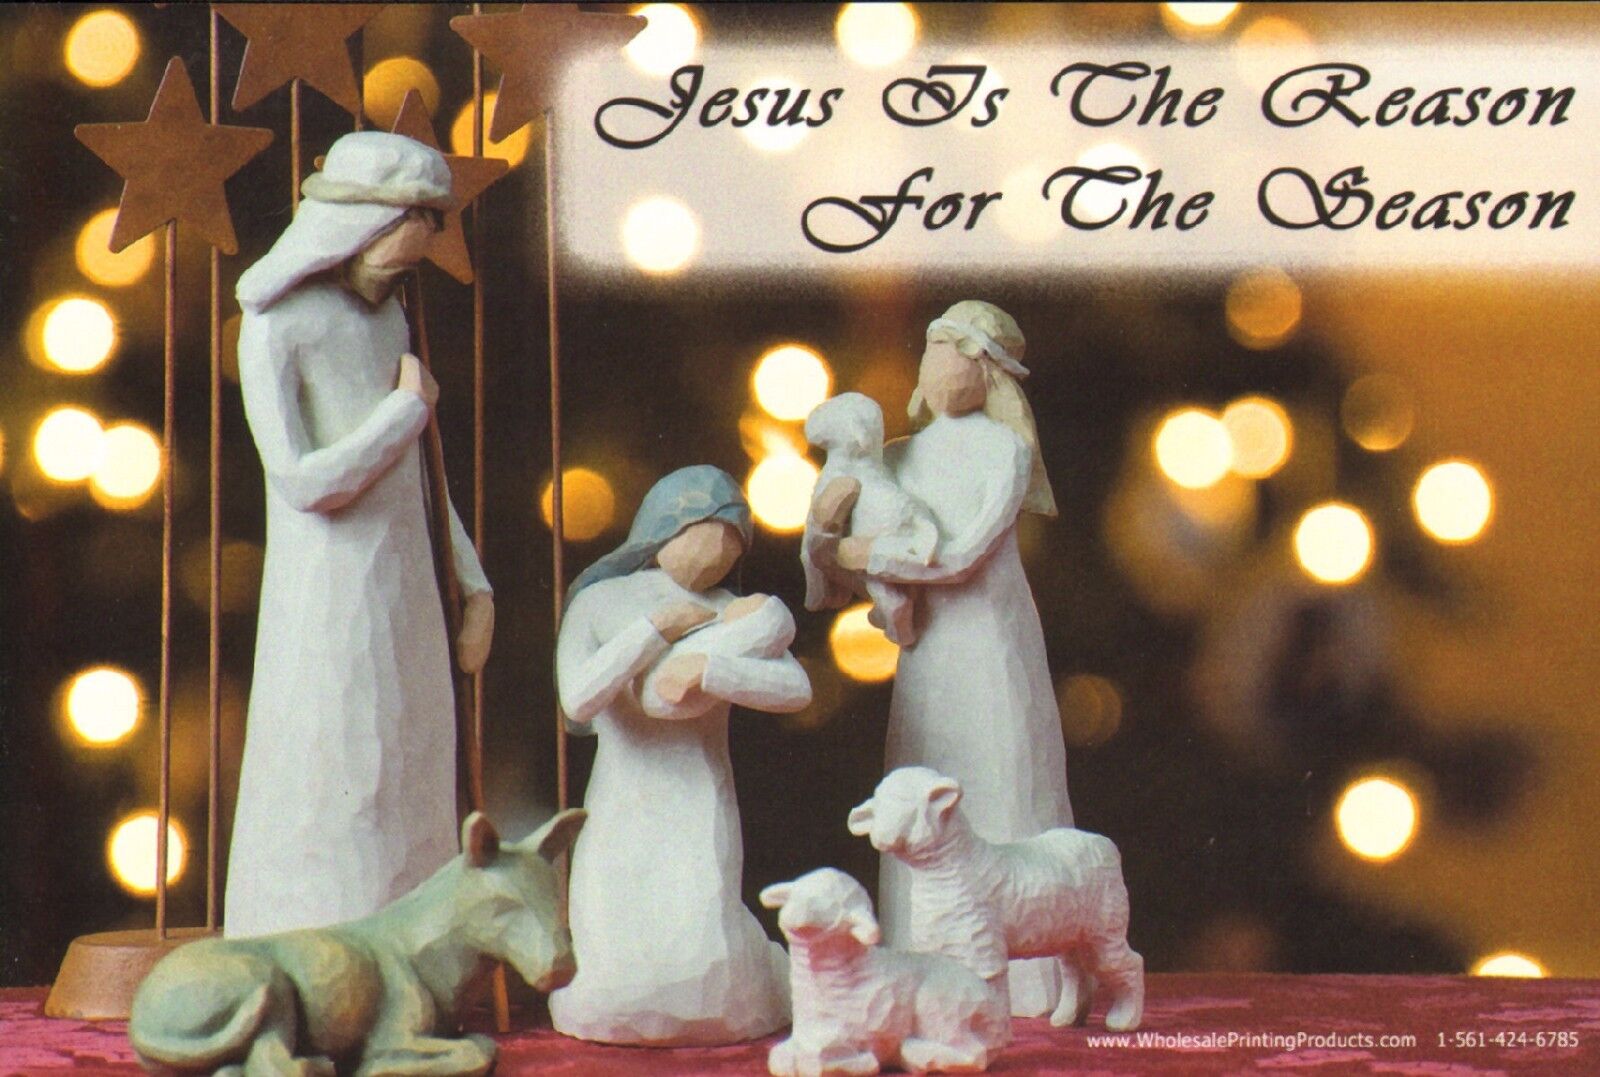 Jesus Is The Reason For The Season - Keep Christ in Christmas - 25 Postcards NEW Без бренда